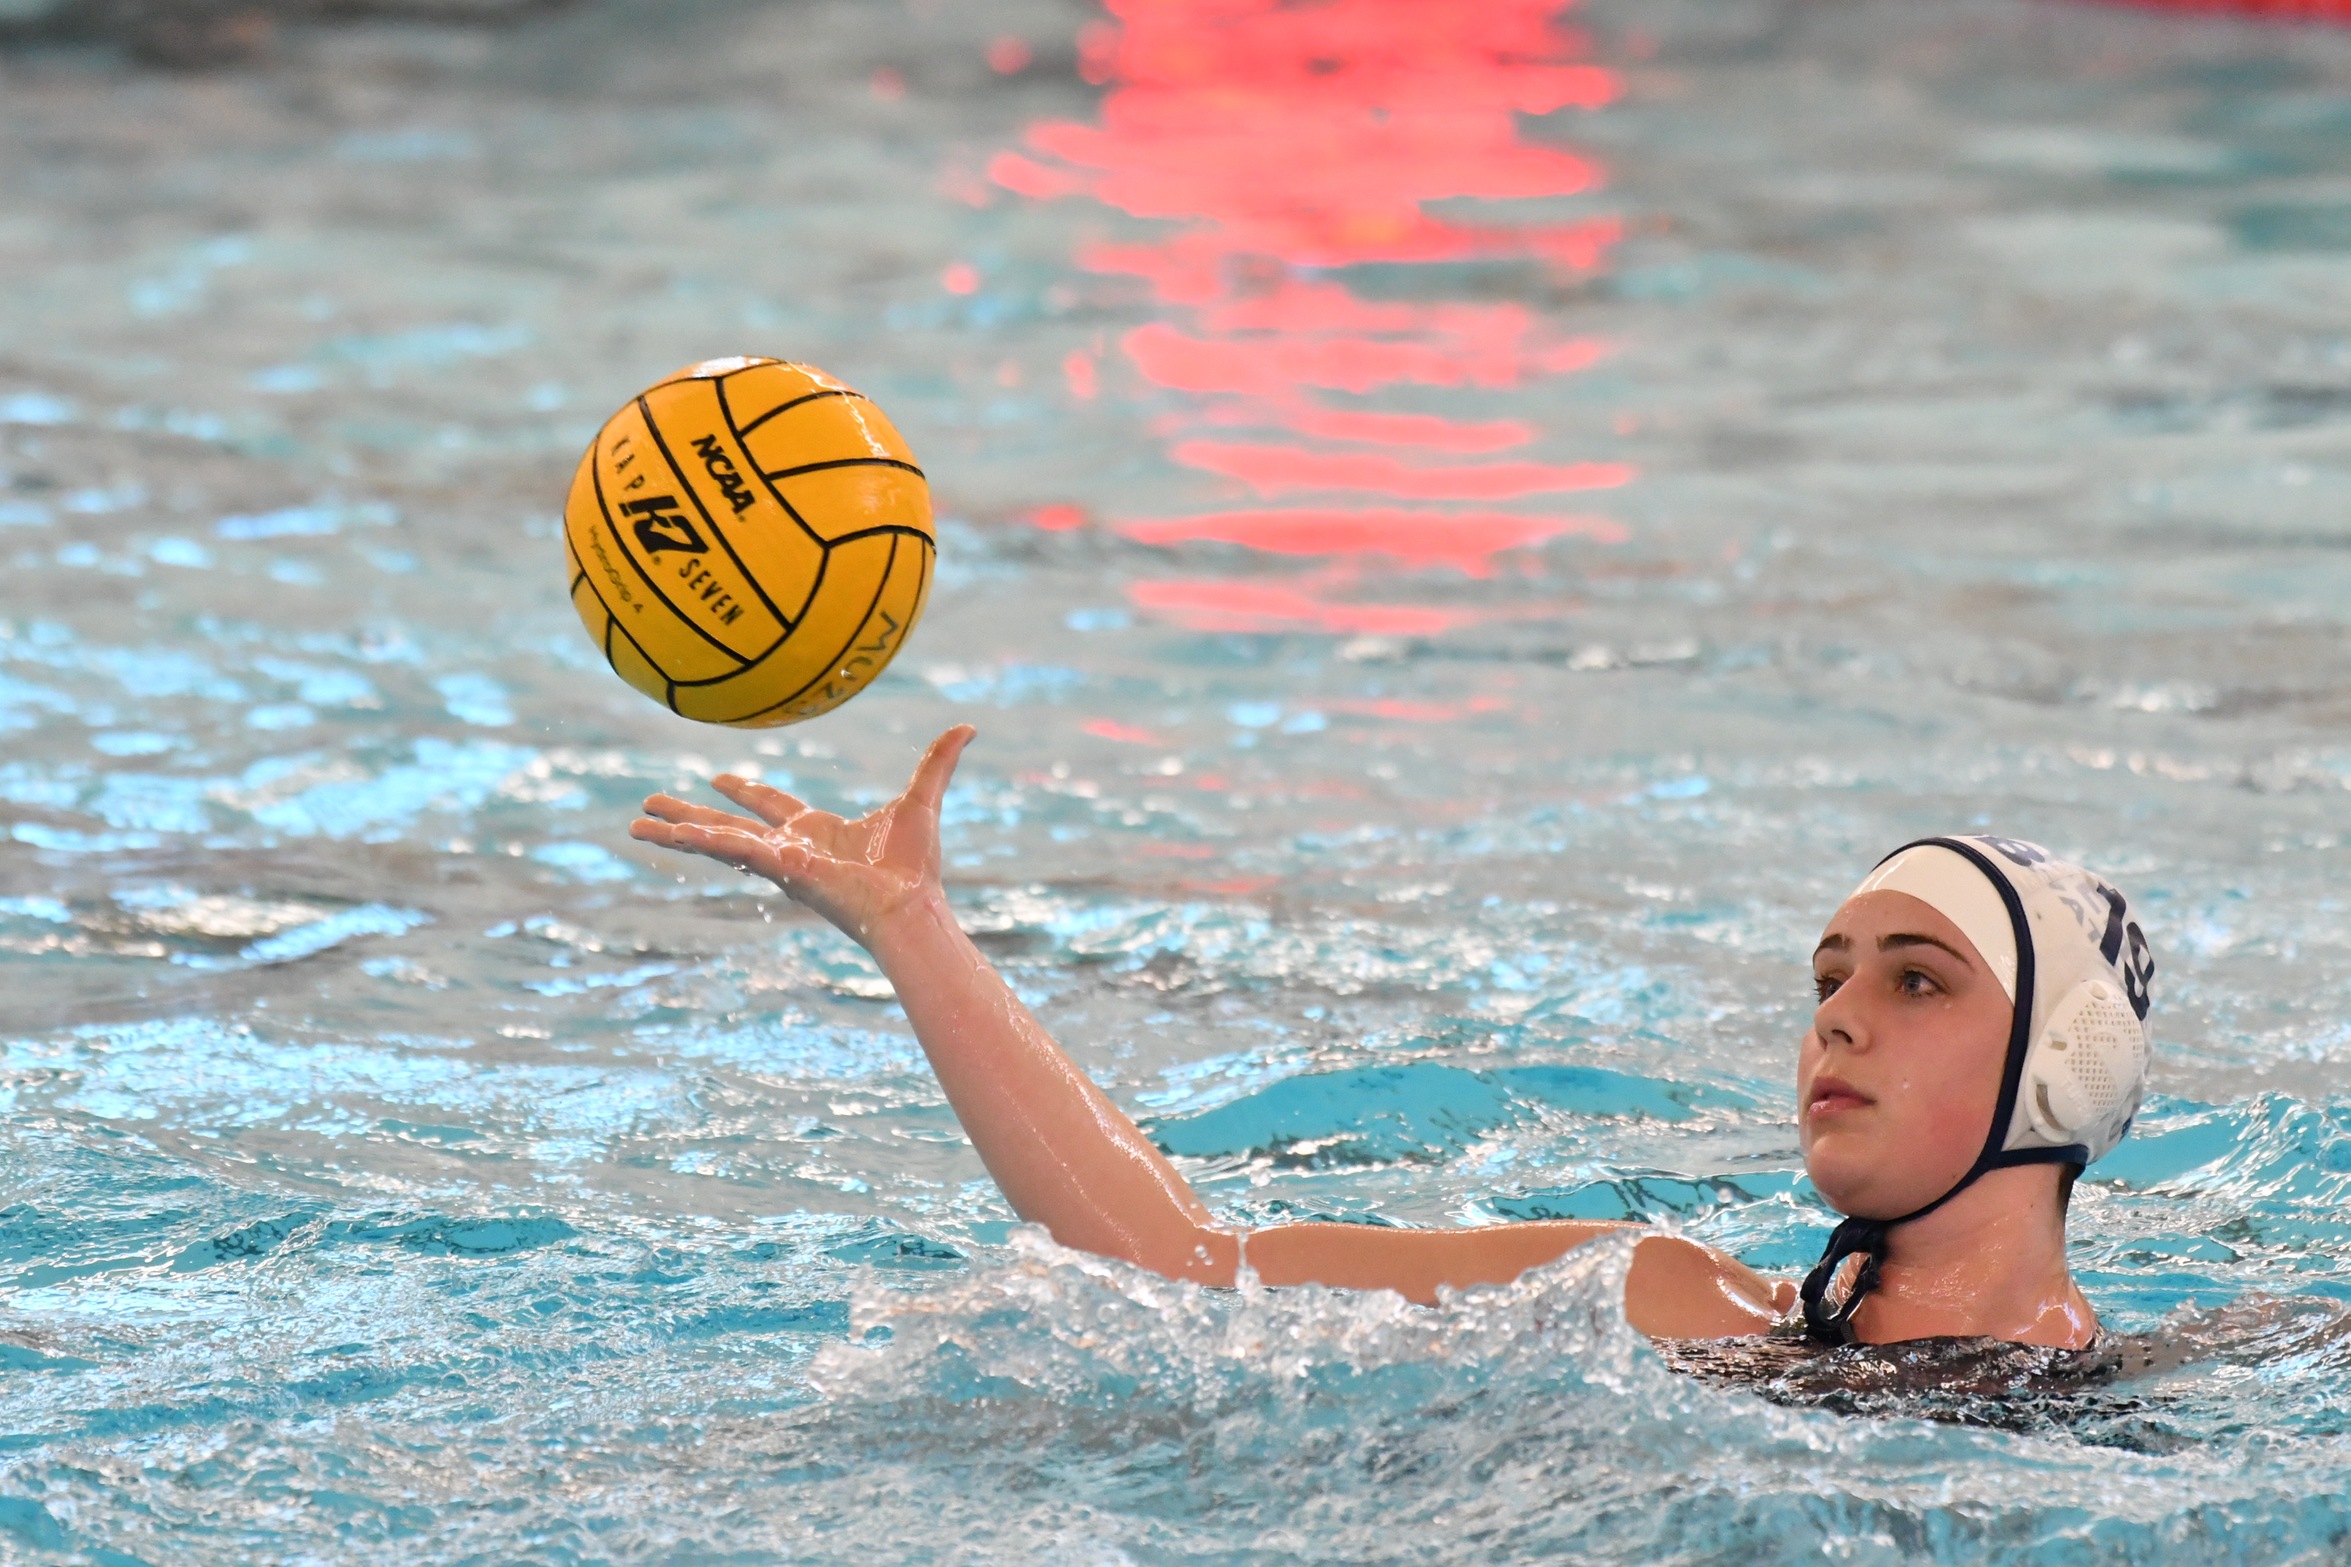 Carthage Edges Women's Water Polo at CWPA Championships